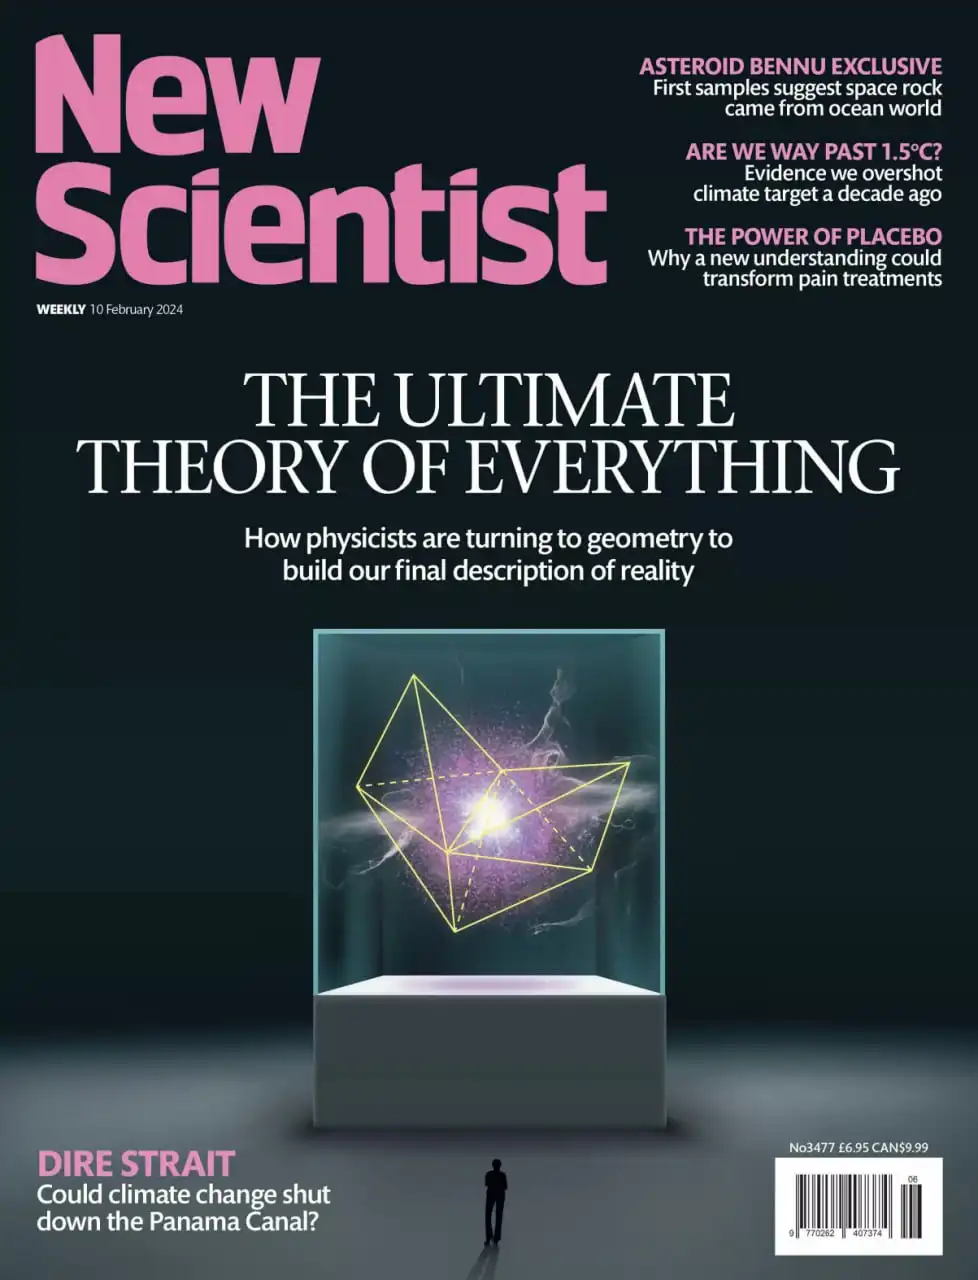 New Scientist - 10 February 2024 (science)